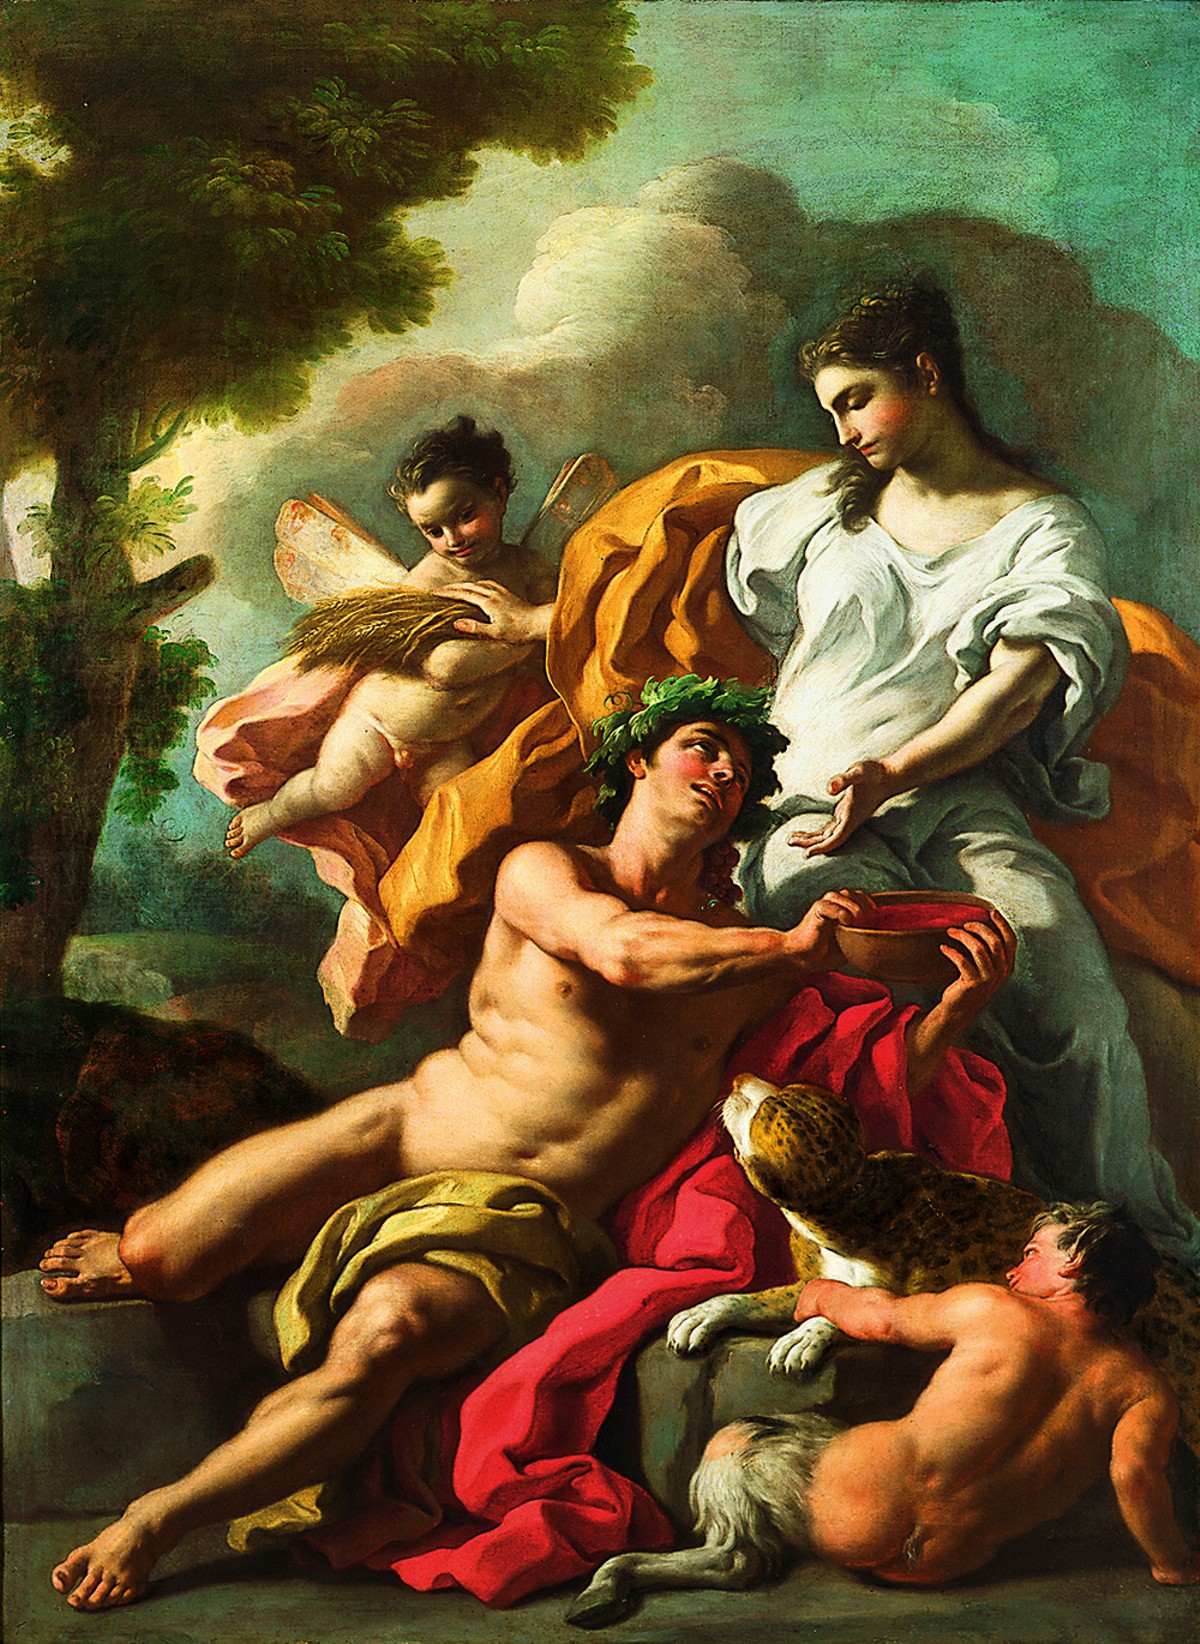 "Bacchus and Ceres"